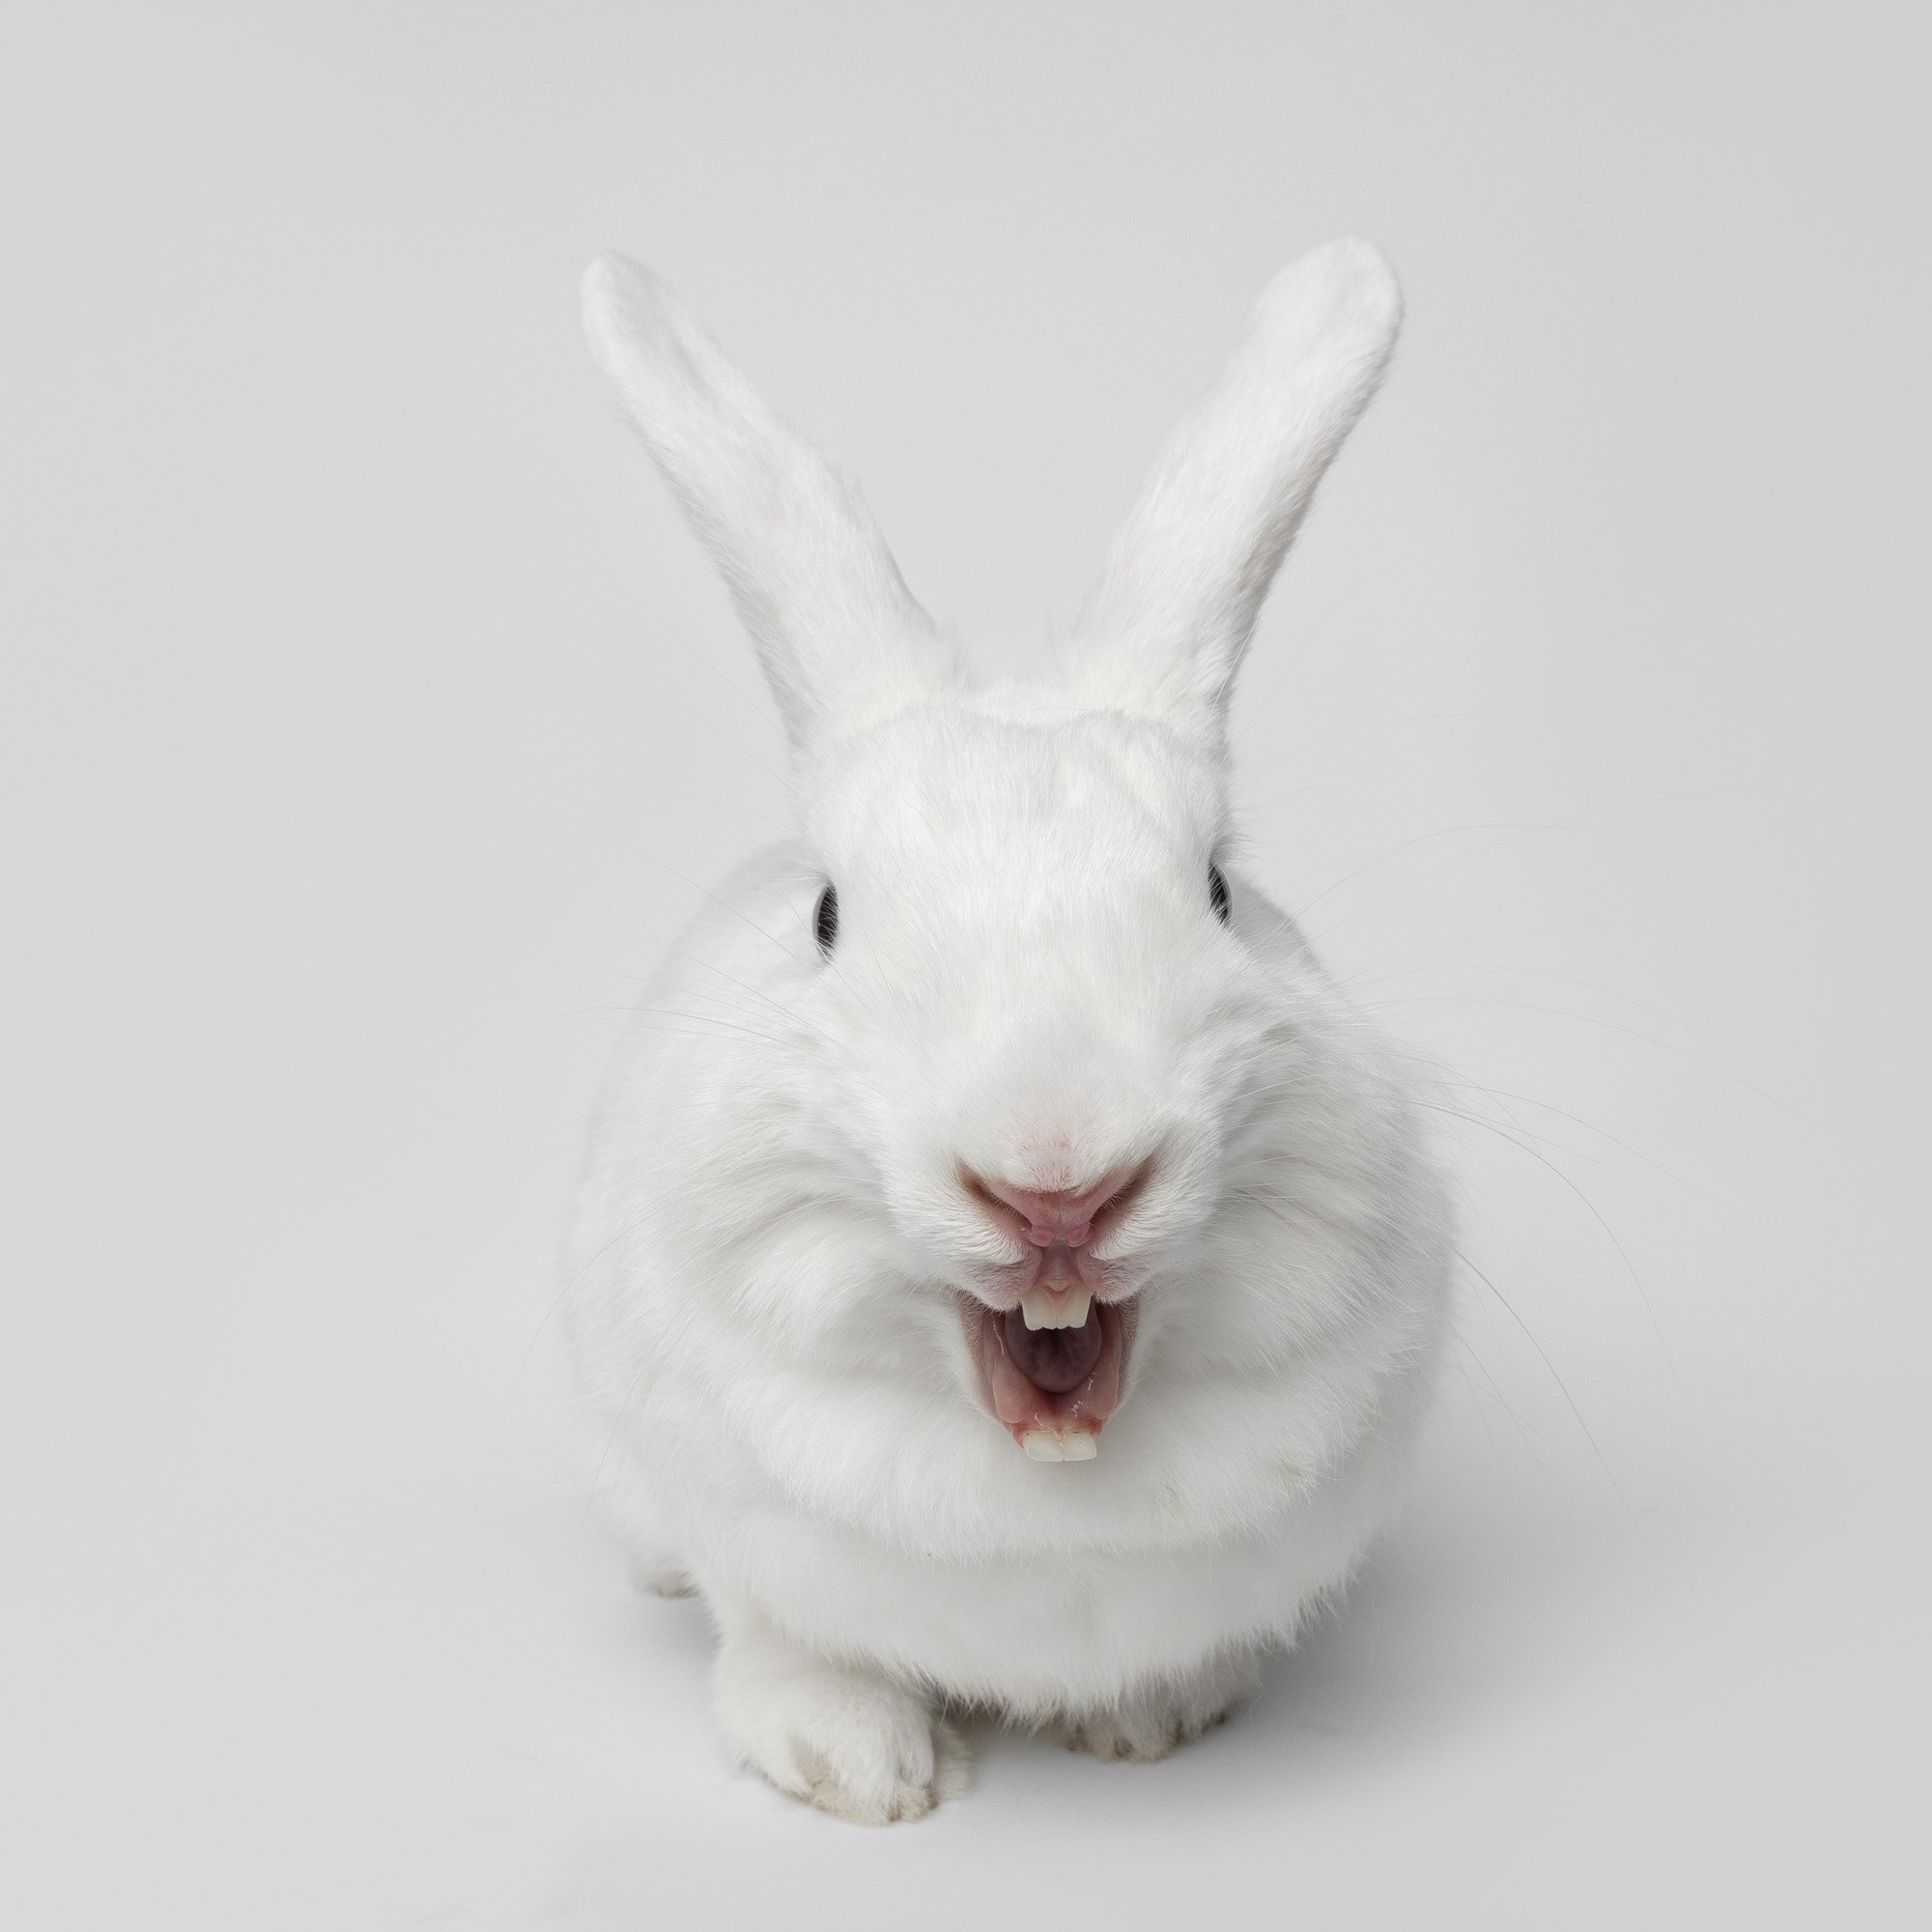 Greg Murray Photography | Pet and Animal Stock Photography | studio portrait of smiling white raabbit against a white backdrop.jpg